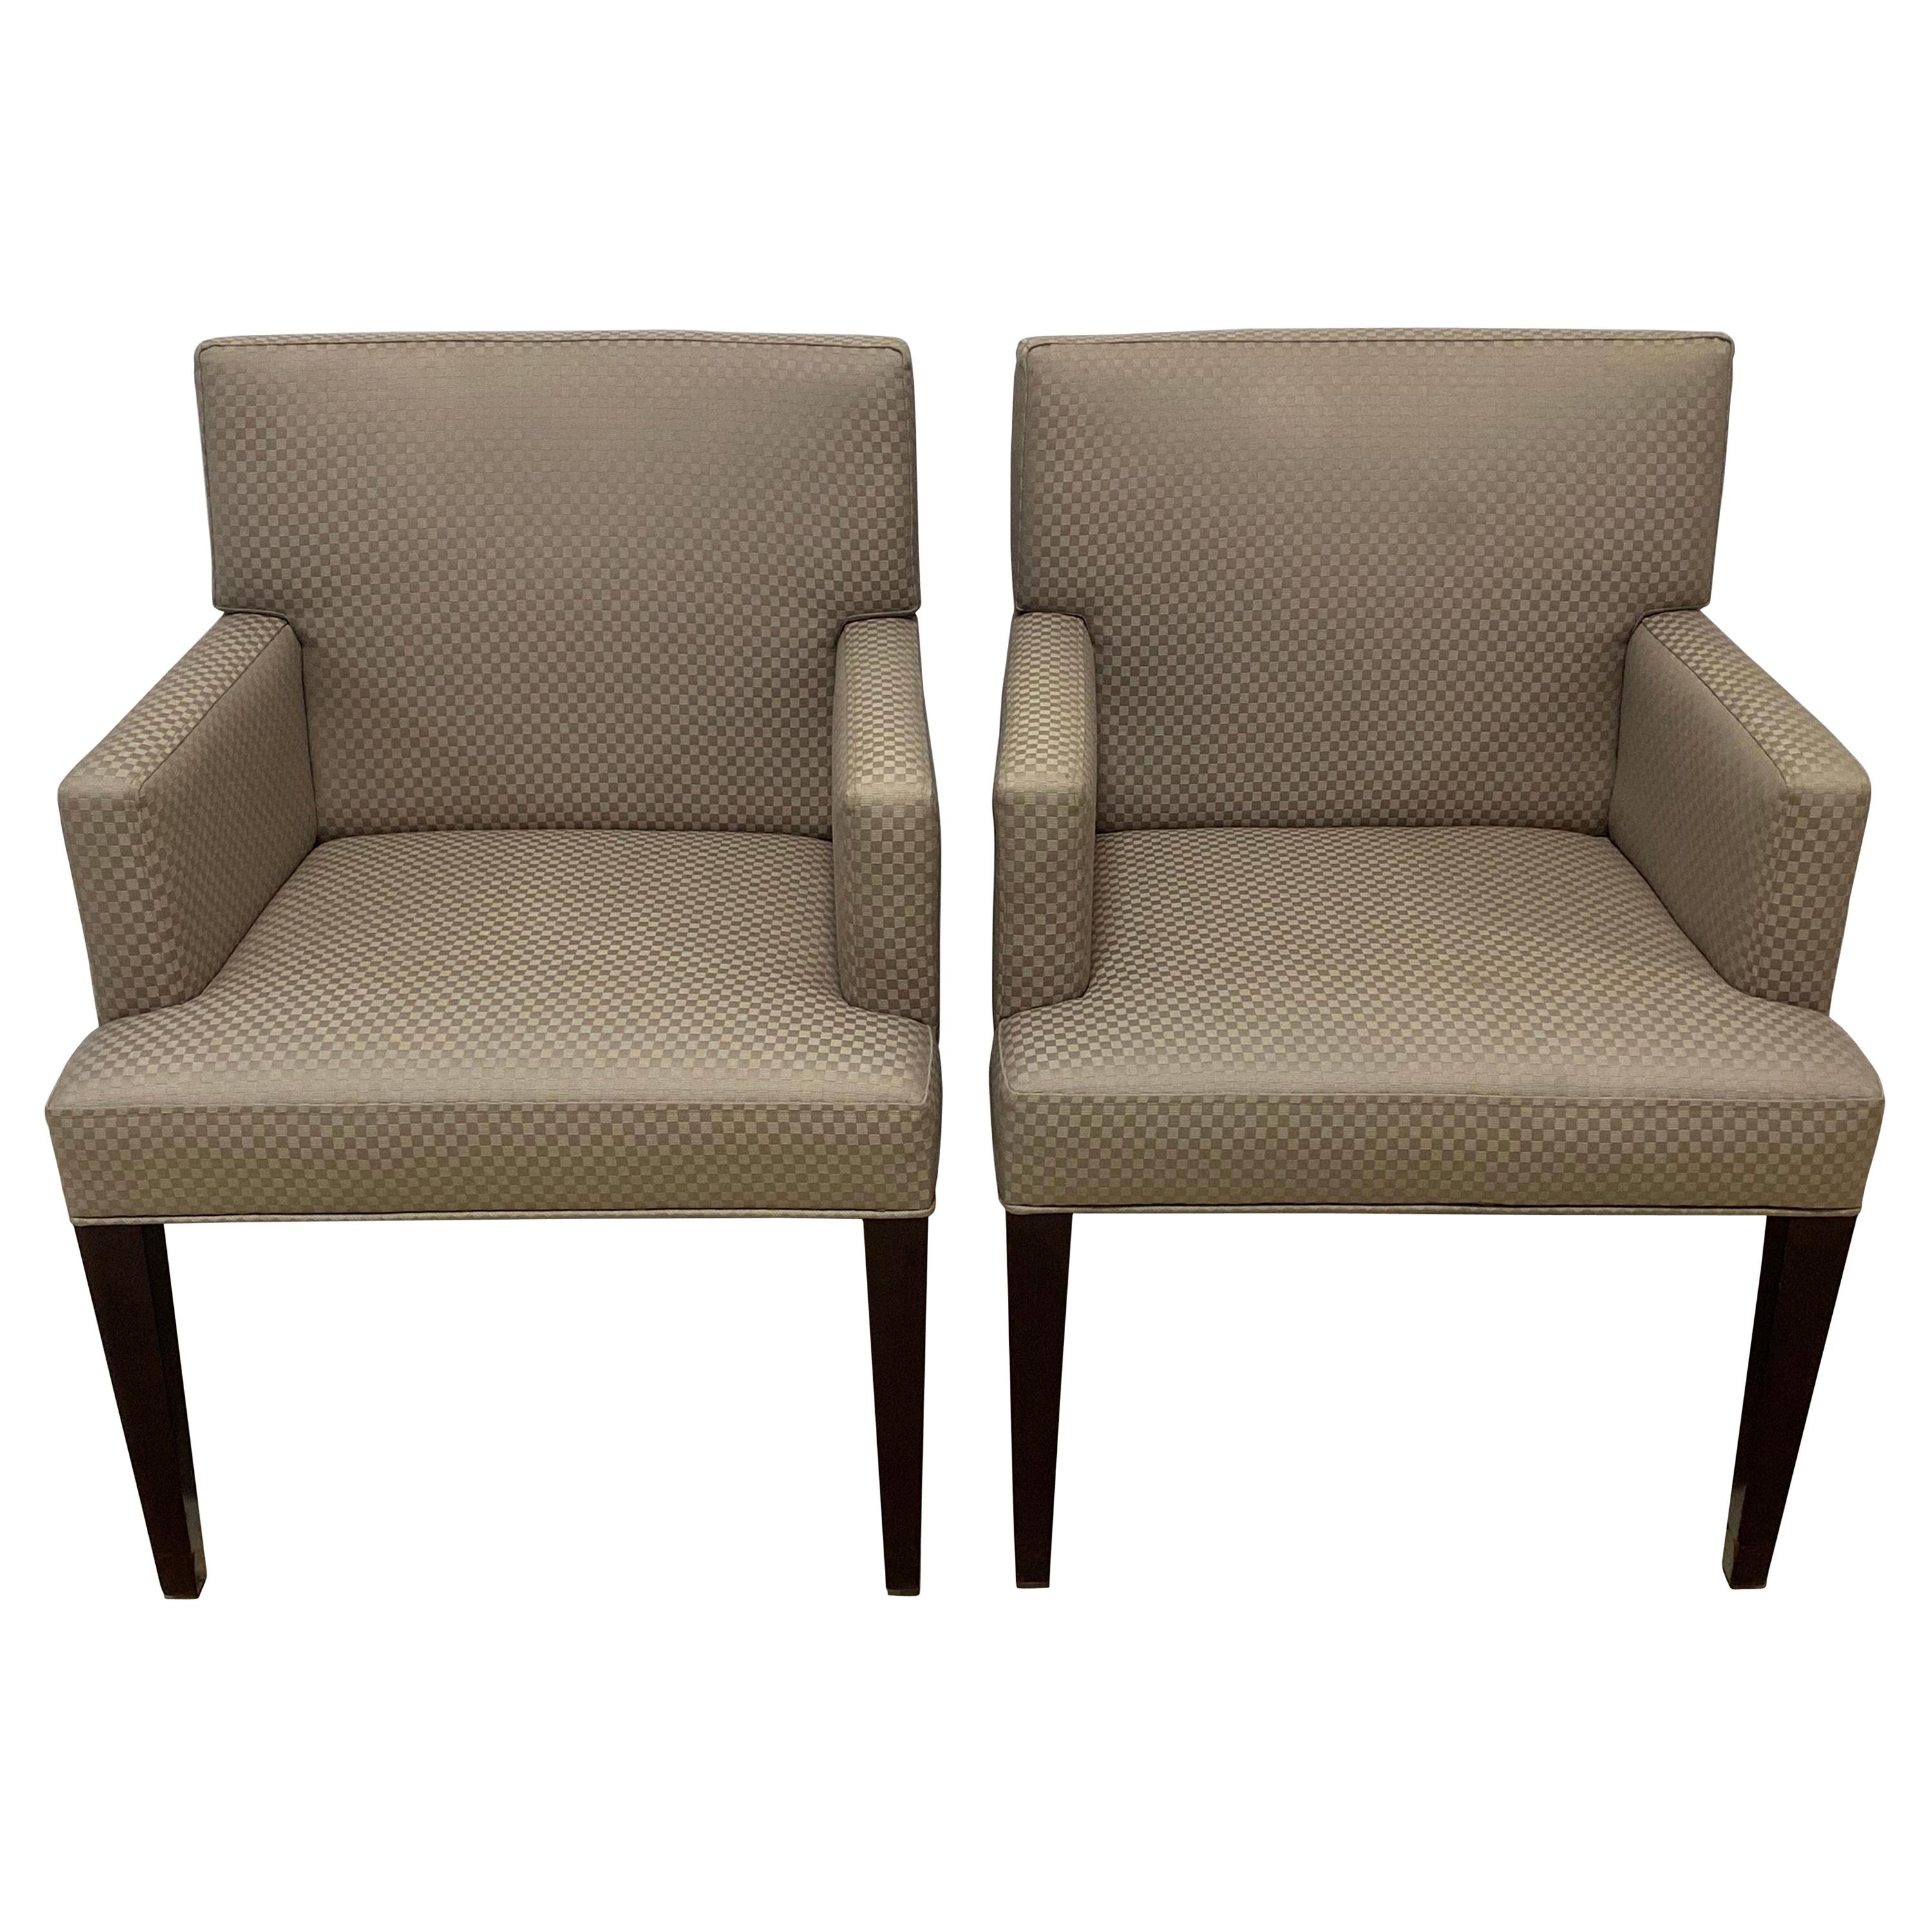 Four HBF Stamped Covered Upholstered Armchairs by Pace